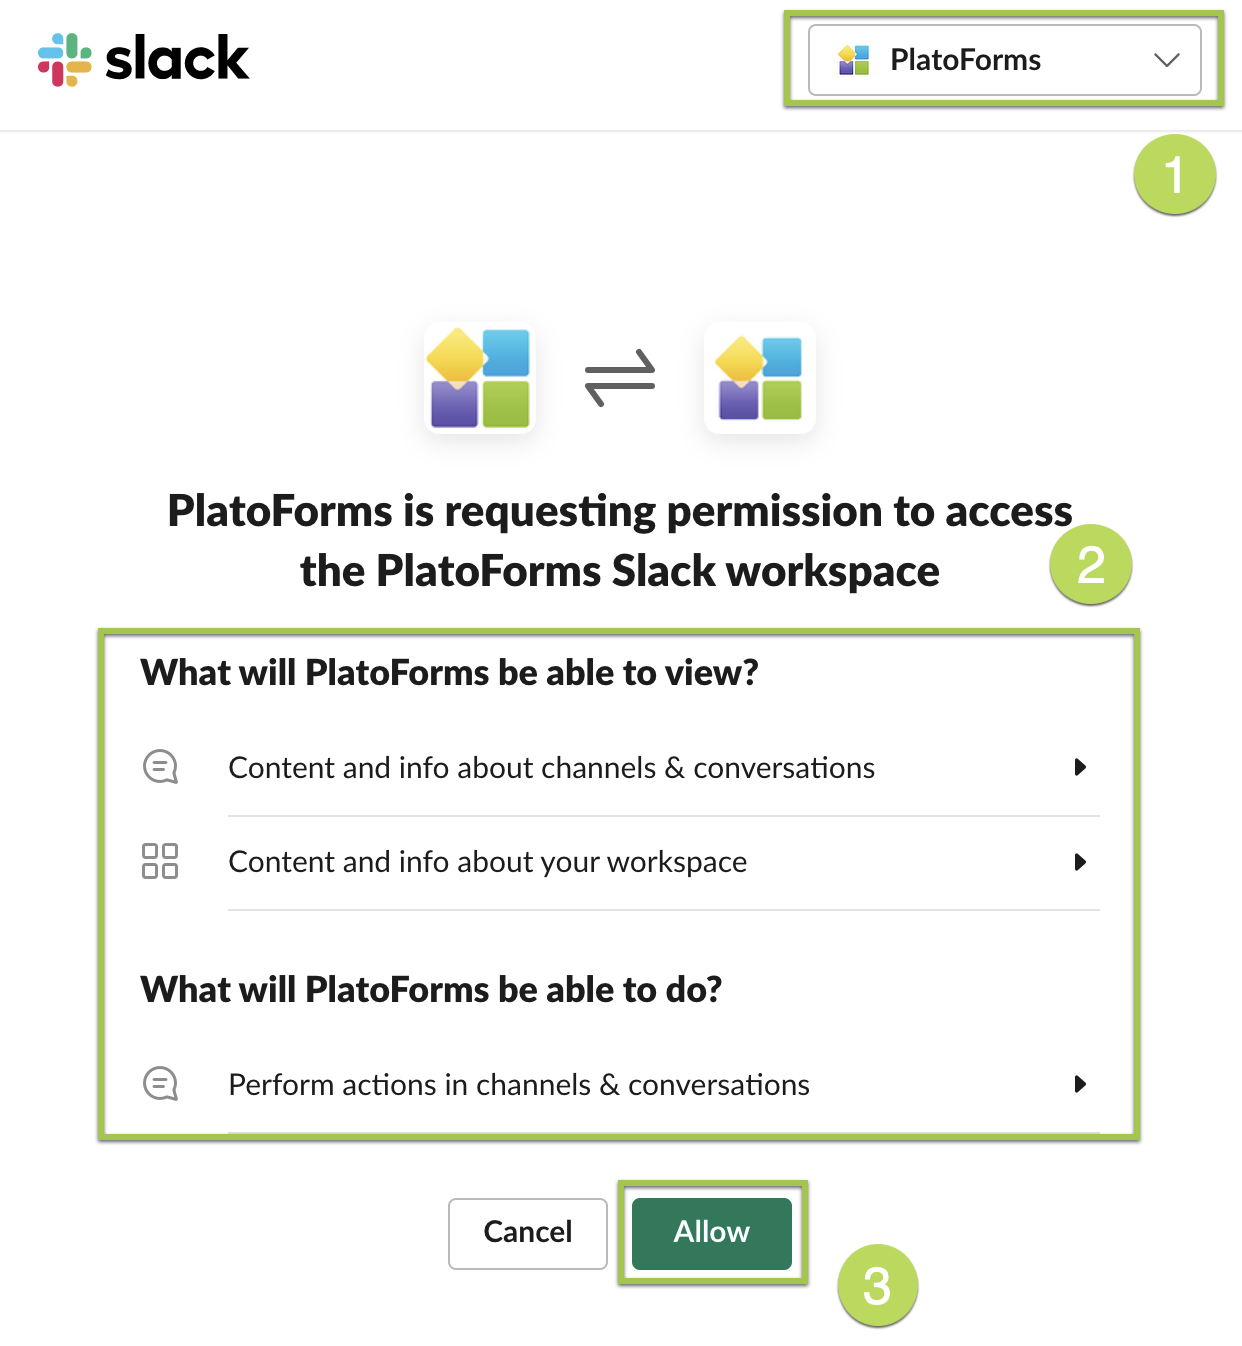 Select Slack workspace and grant permissions